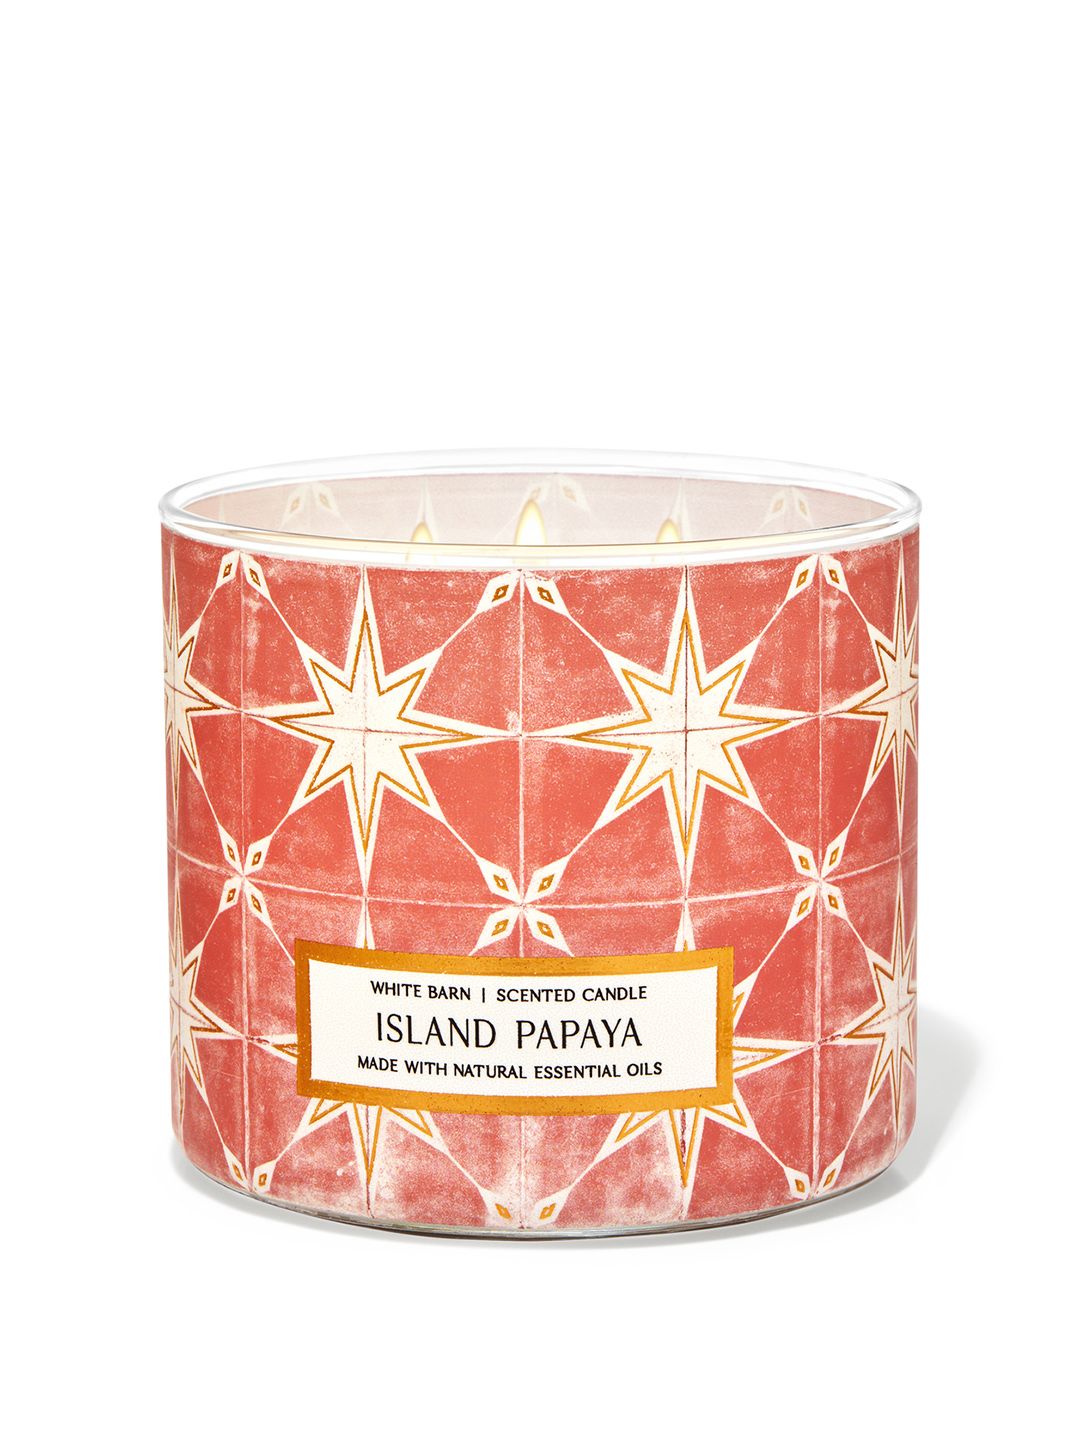 Bath & Body Works Island Papaya 3-Wick Scented Candle with Essential Oils - 411g Price in India